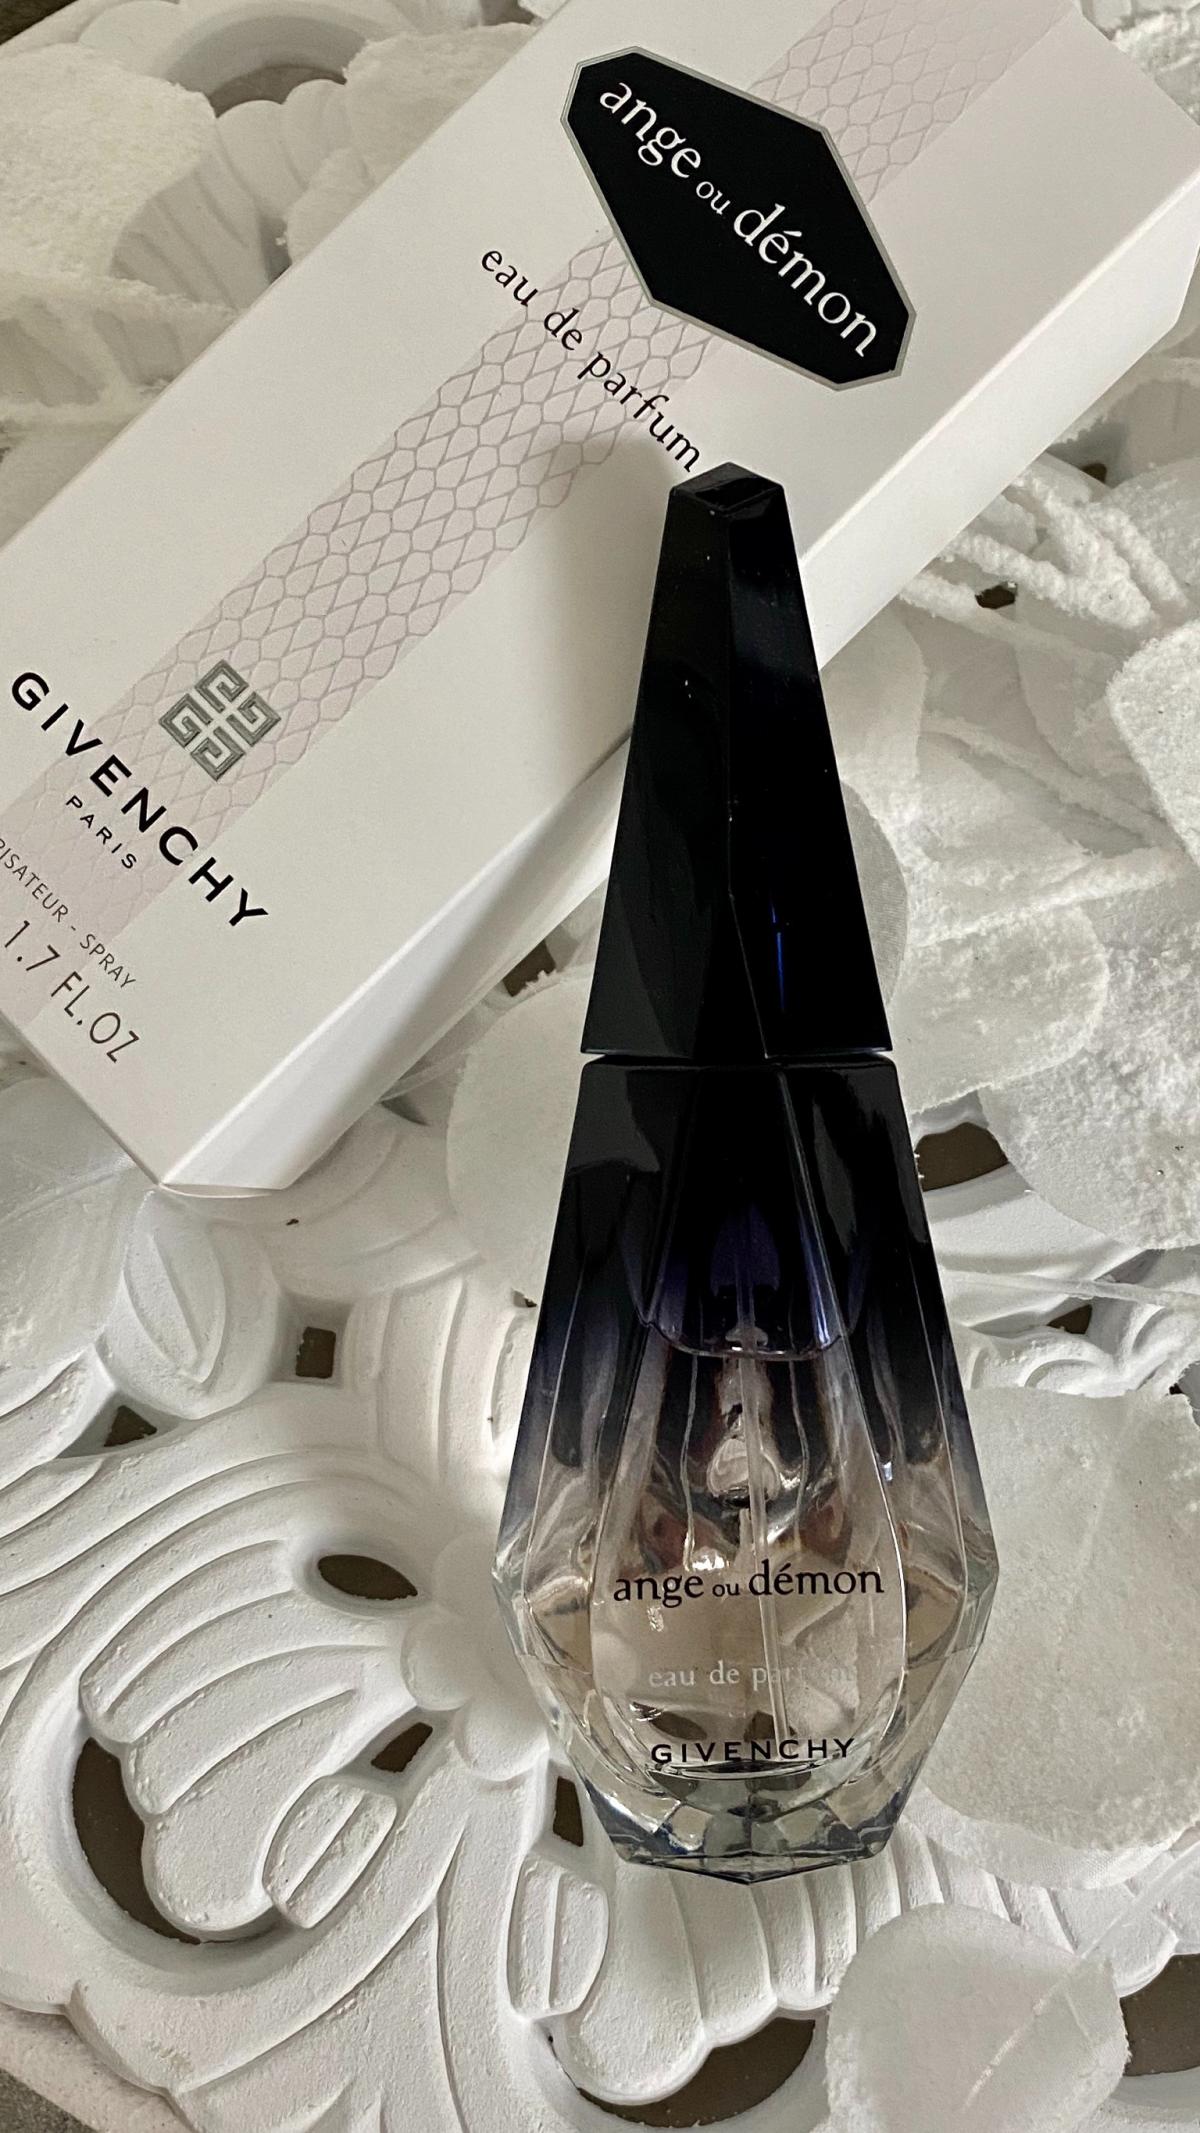 Ange ou Demon Givenchy perfume - a fragrance for women 2006